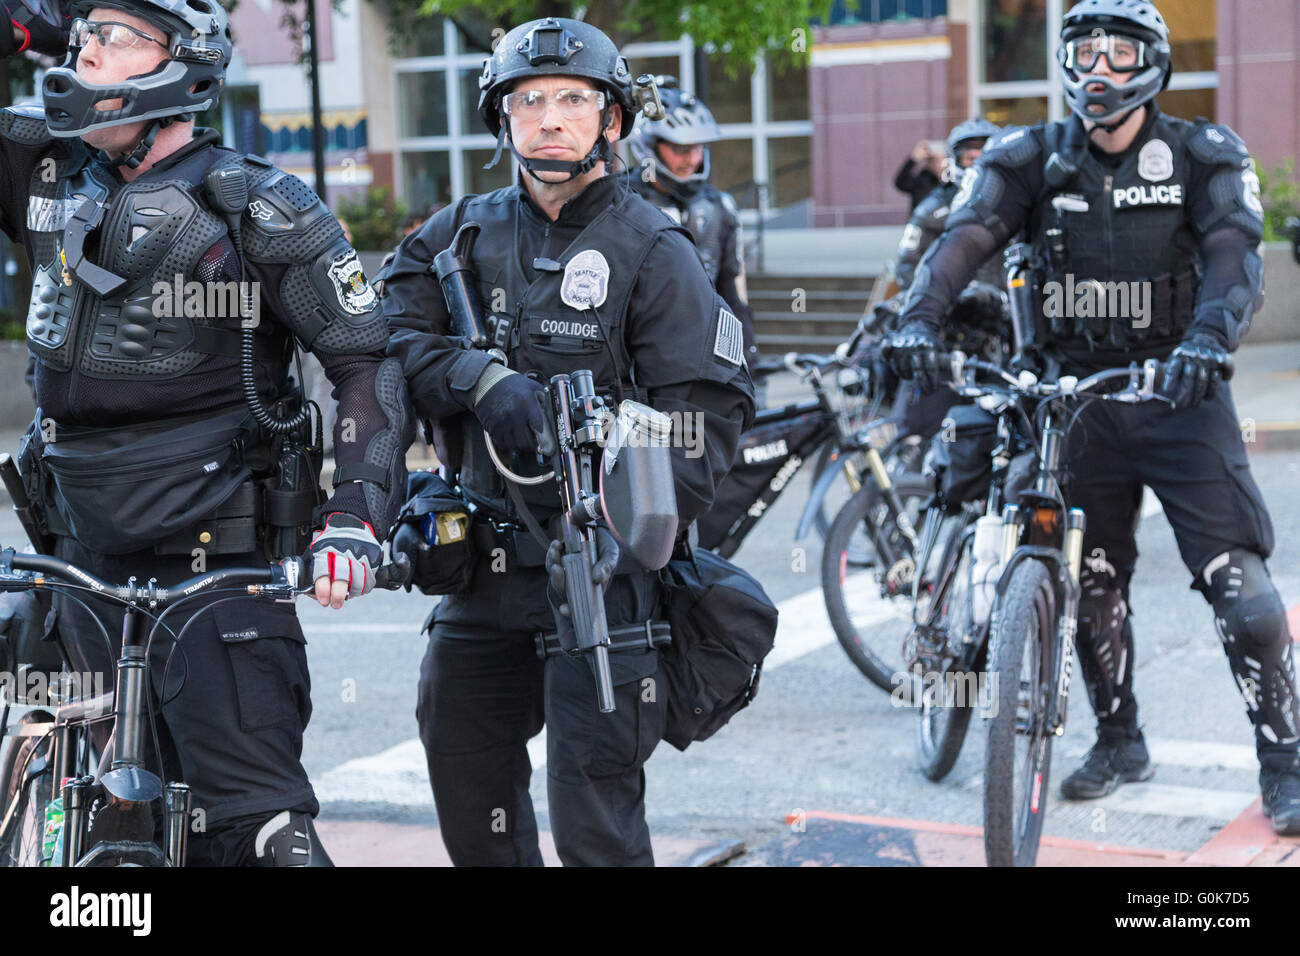 Seattle, WA, USA. 1st May, 2016. Police officers respond with crowd dispersal device against Anti-Capitalist/Police activists. Stock Photo